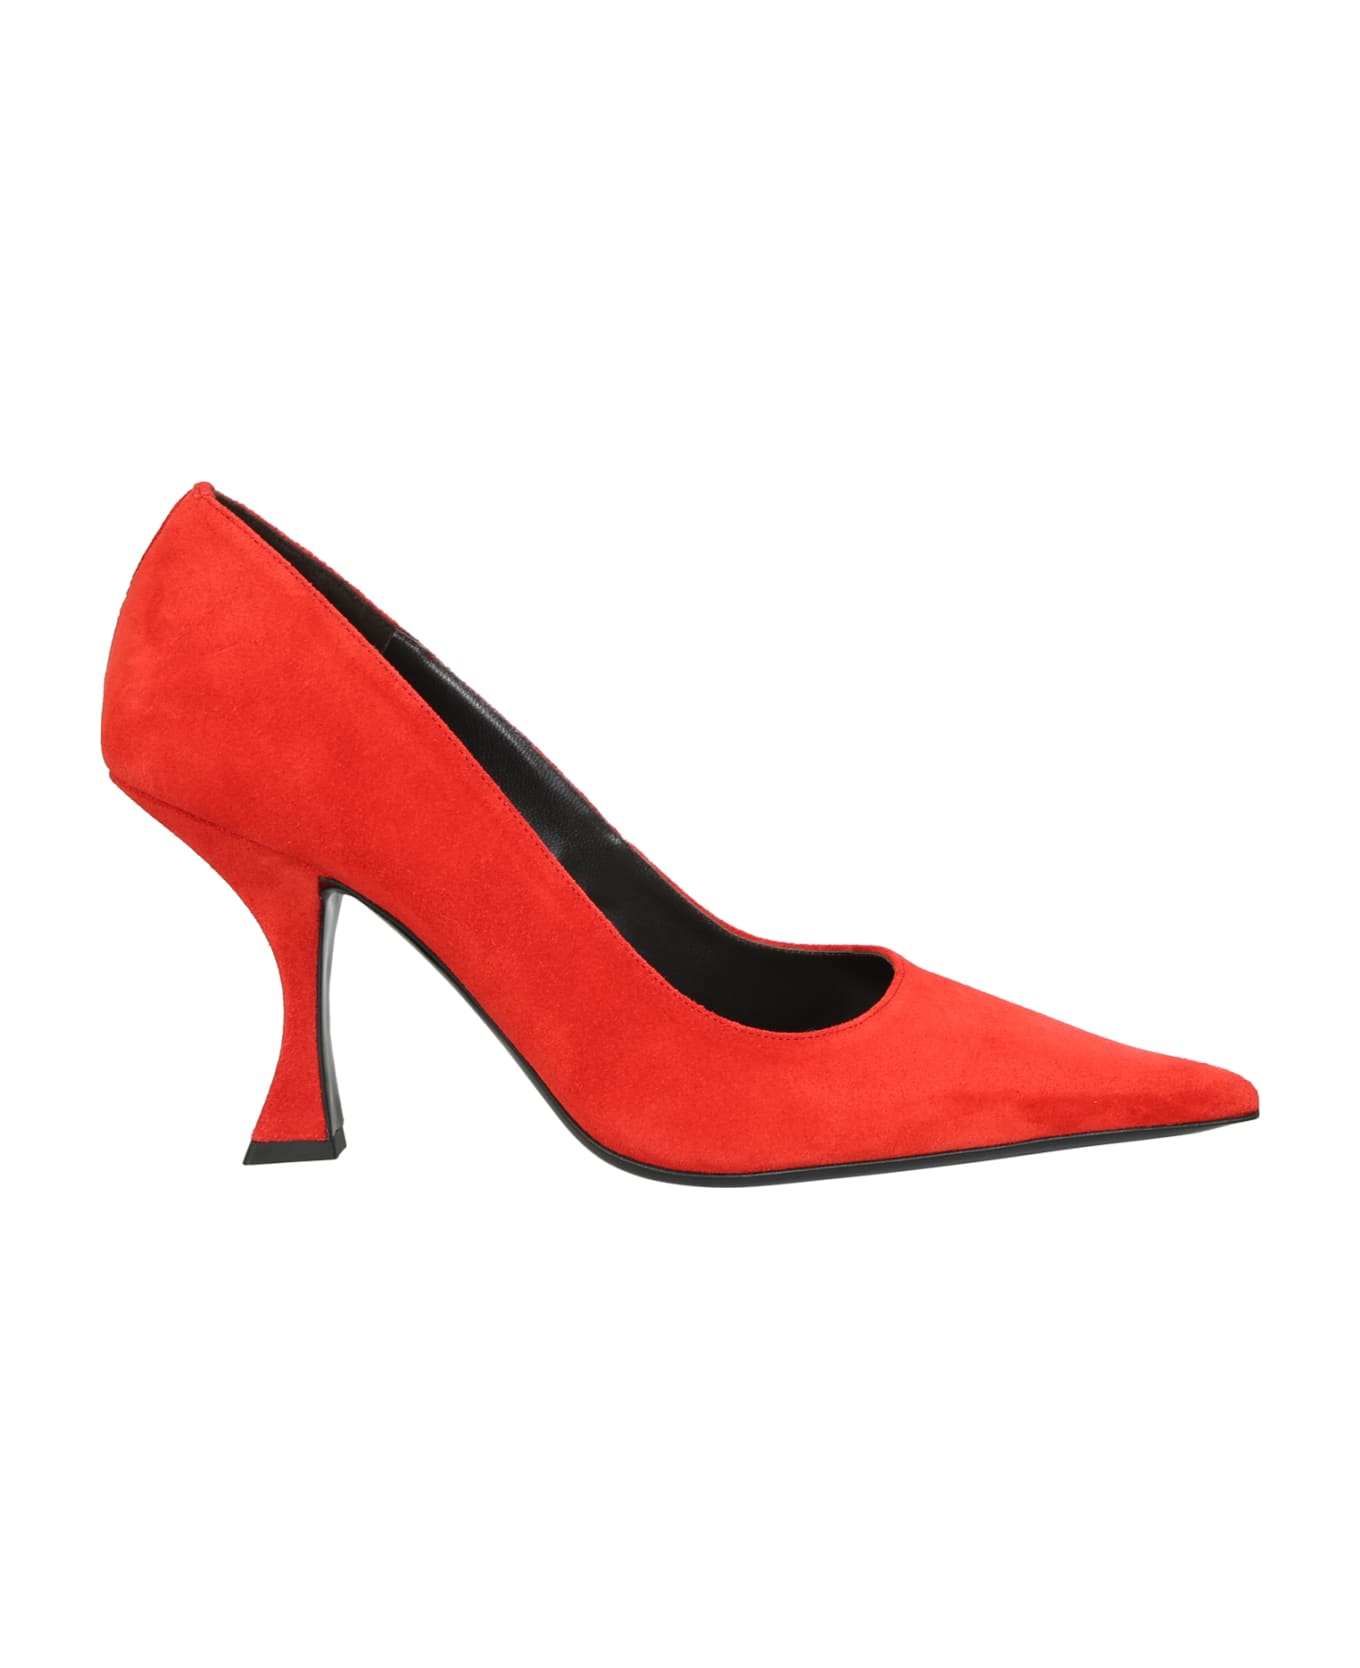 BY FAR Viva Pomodoro Suede Leather Heel - Red